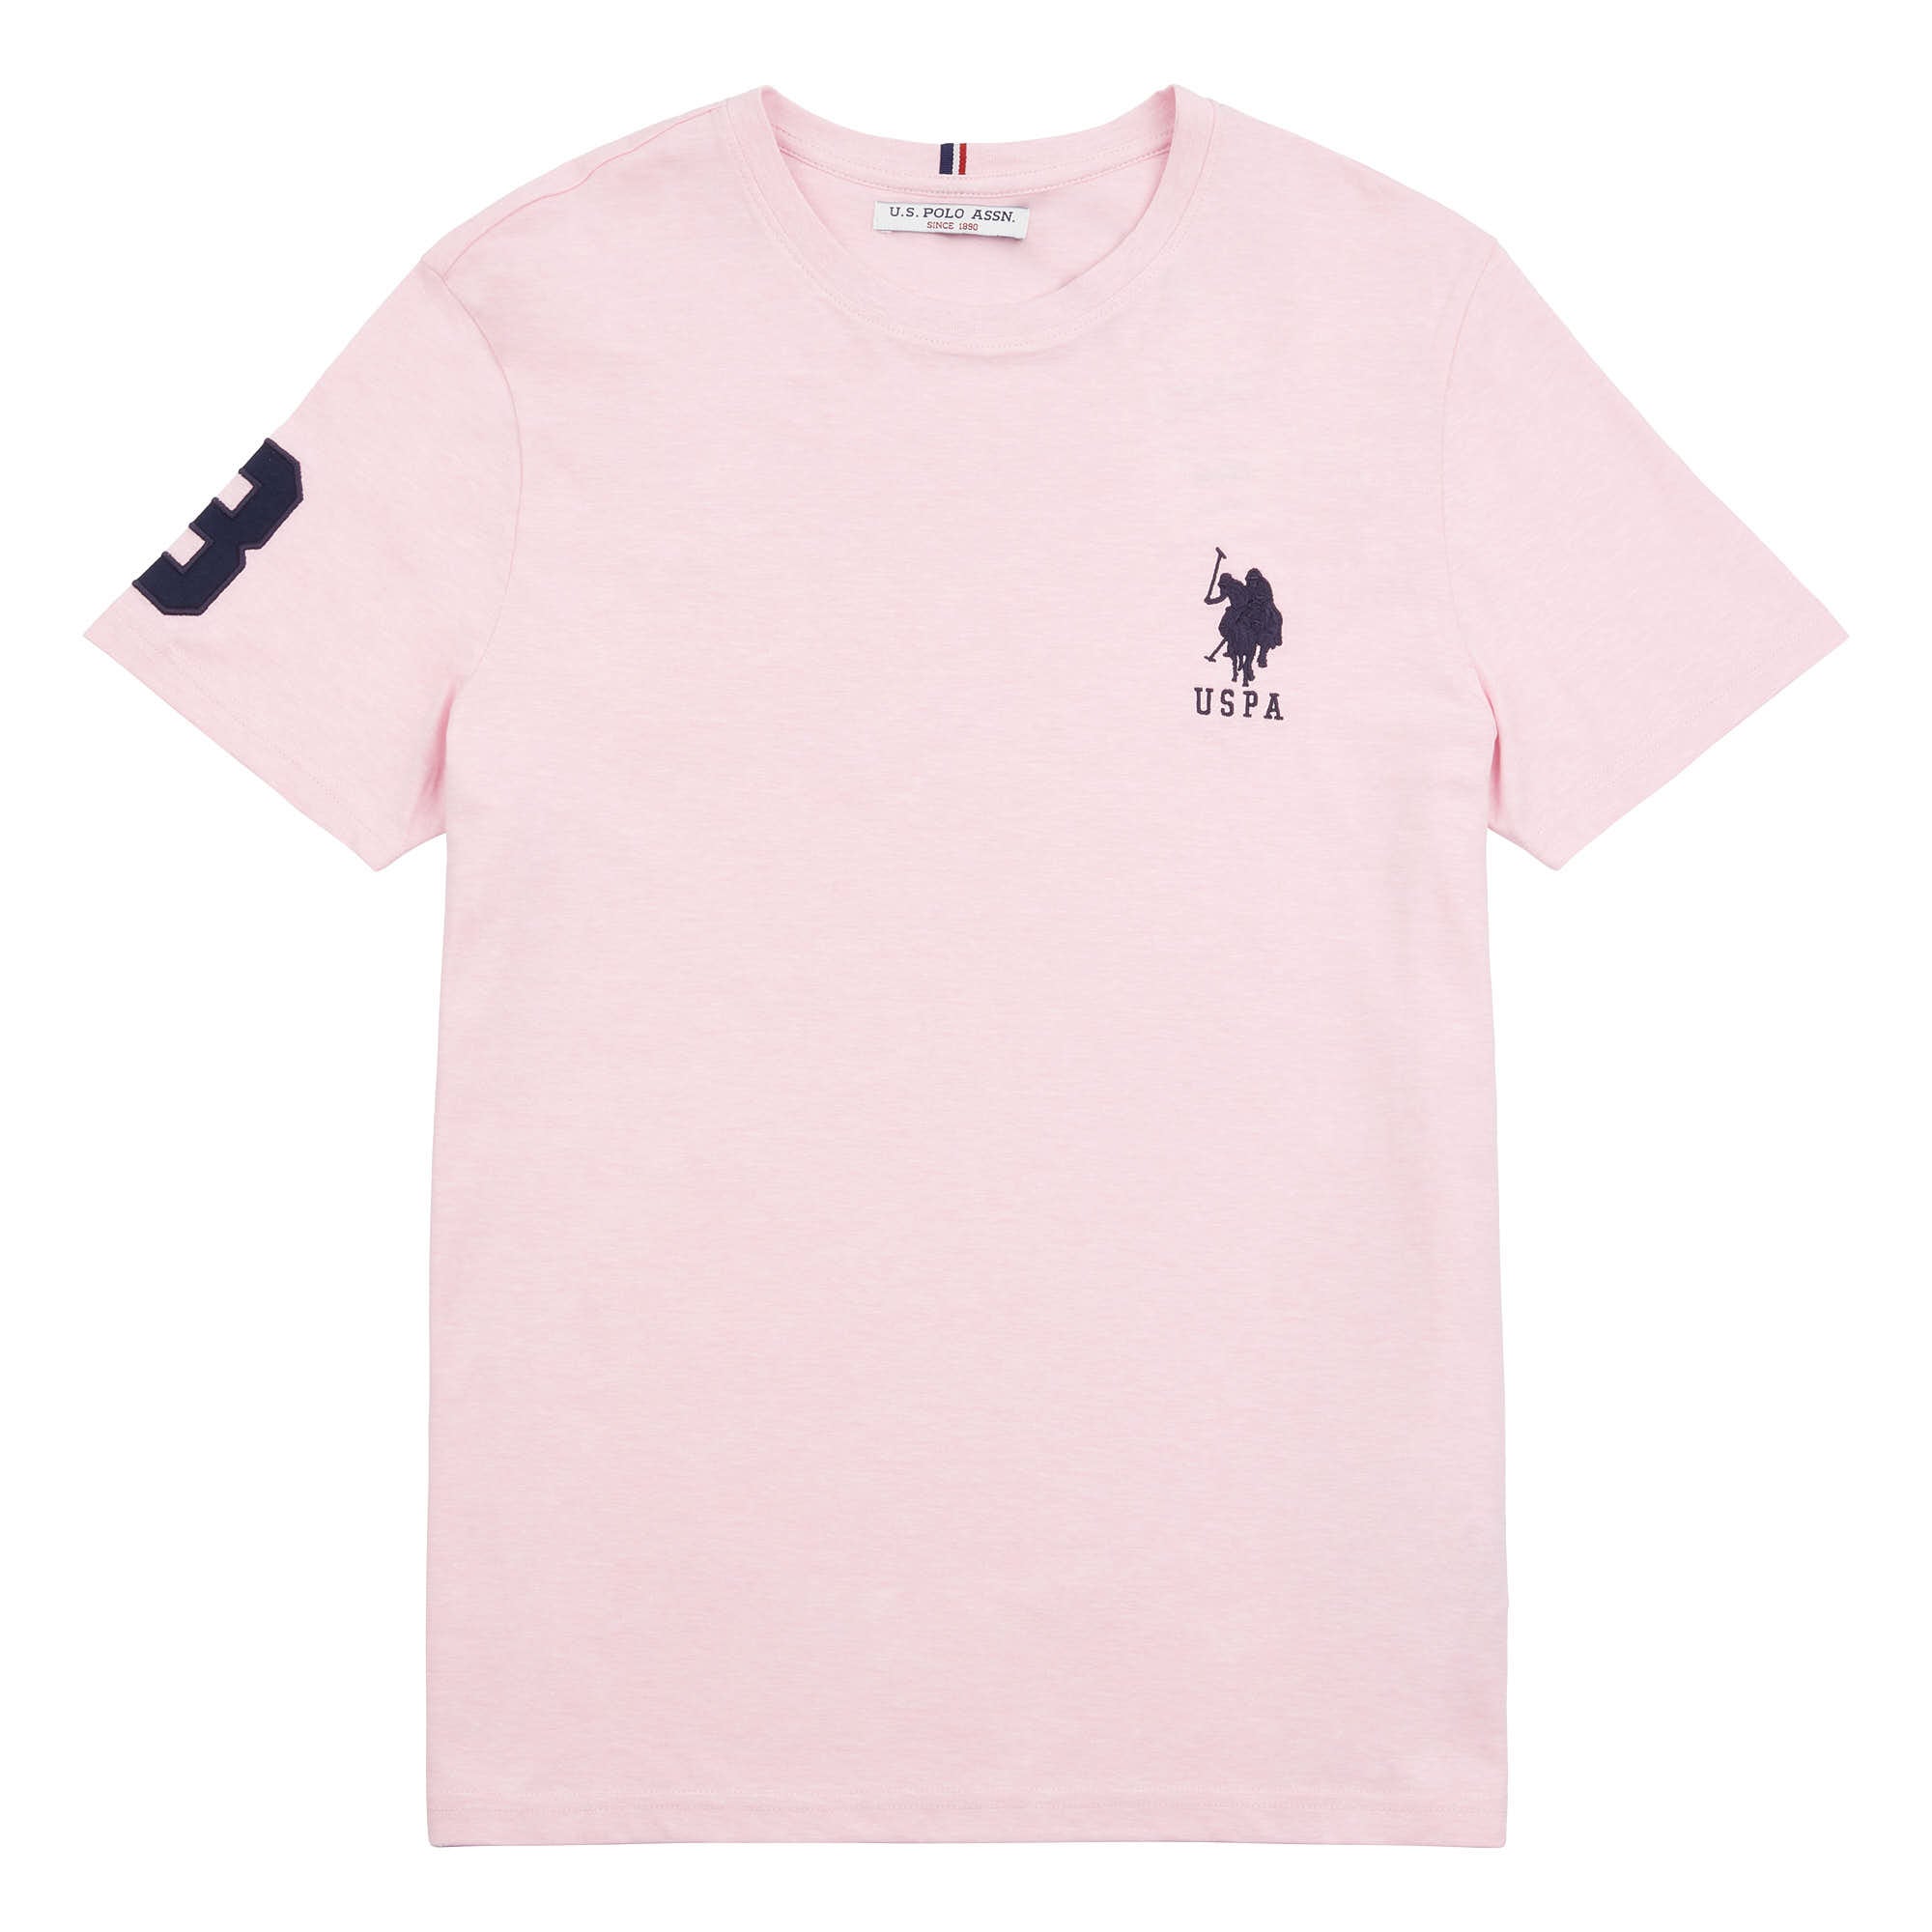 Mens Player 3 T-Shirt in Orchid Pink Marl